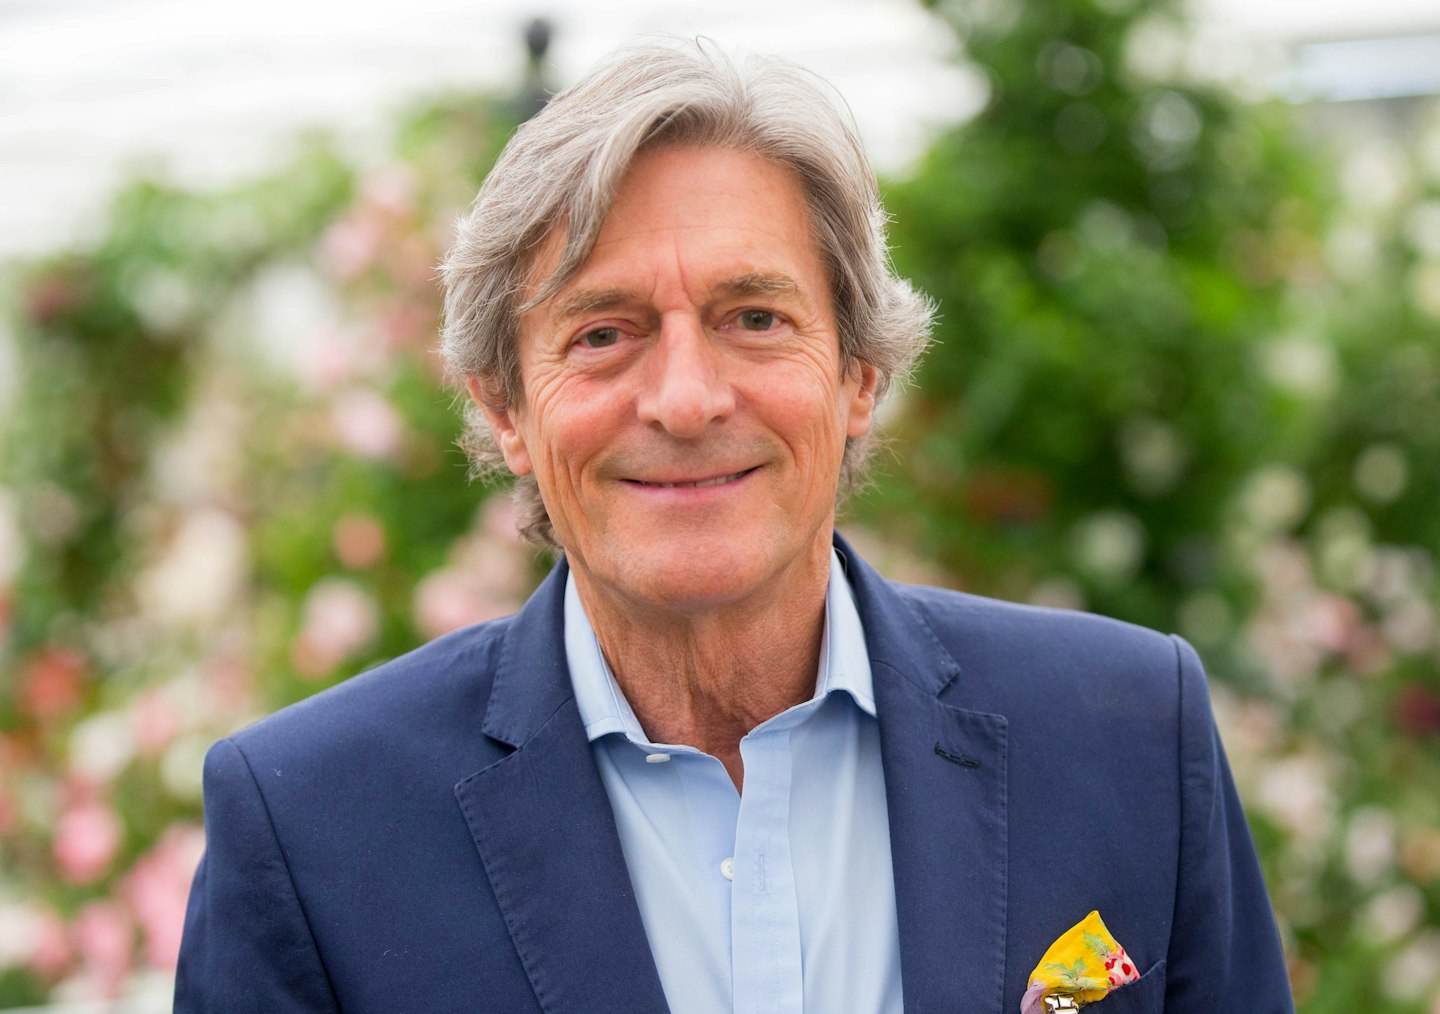 Nigel Havers presents This Morning 